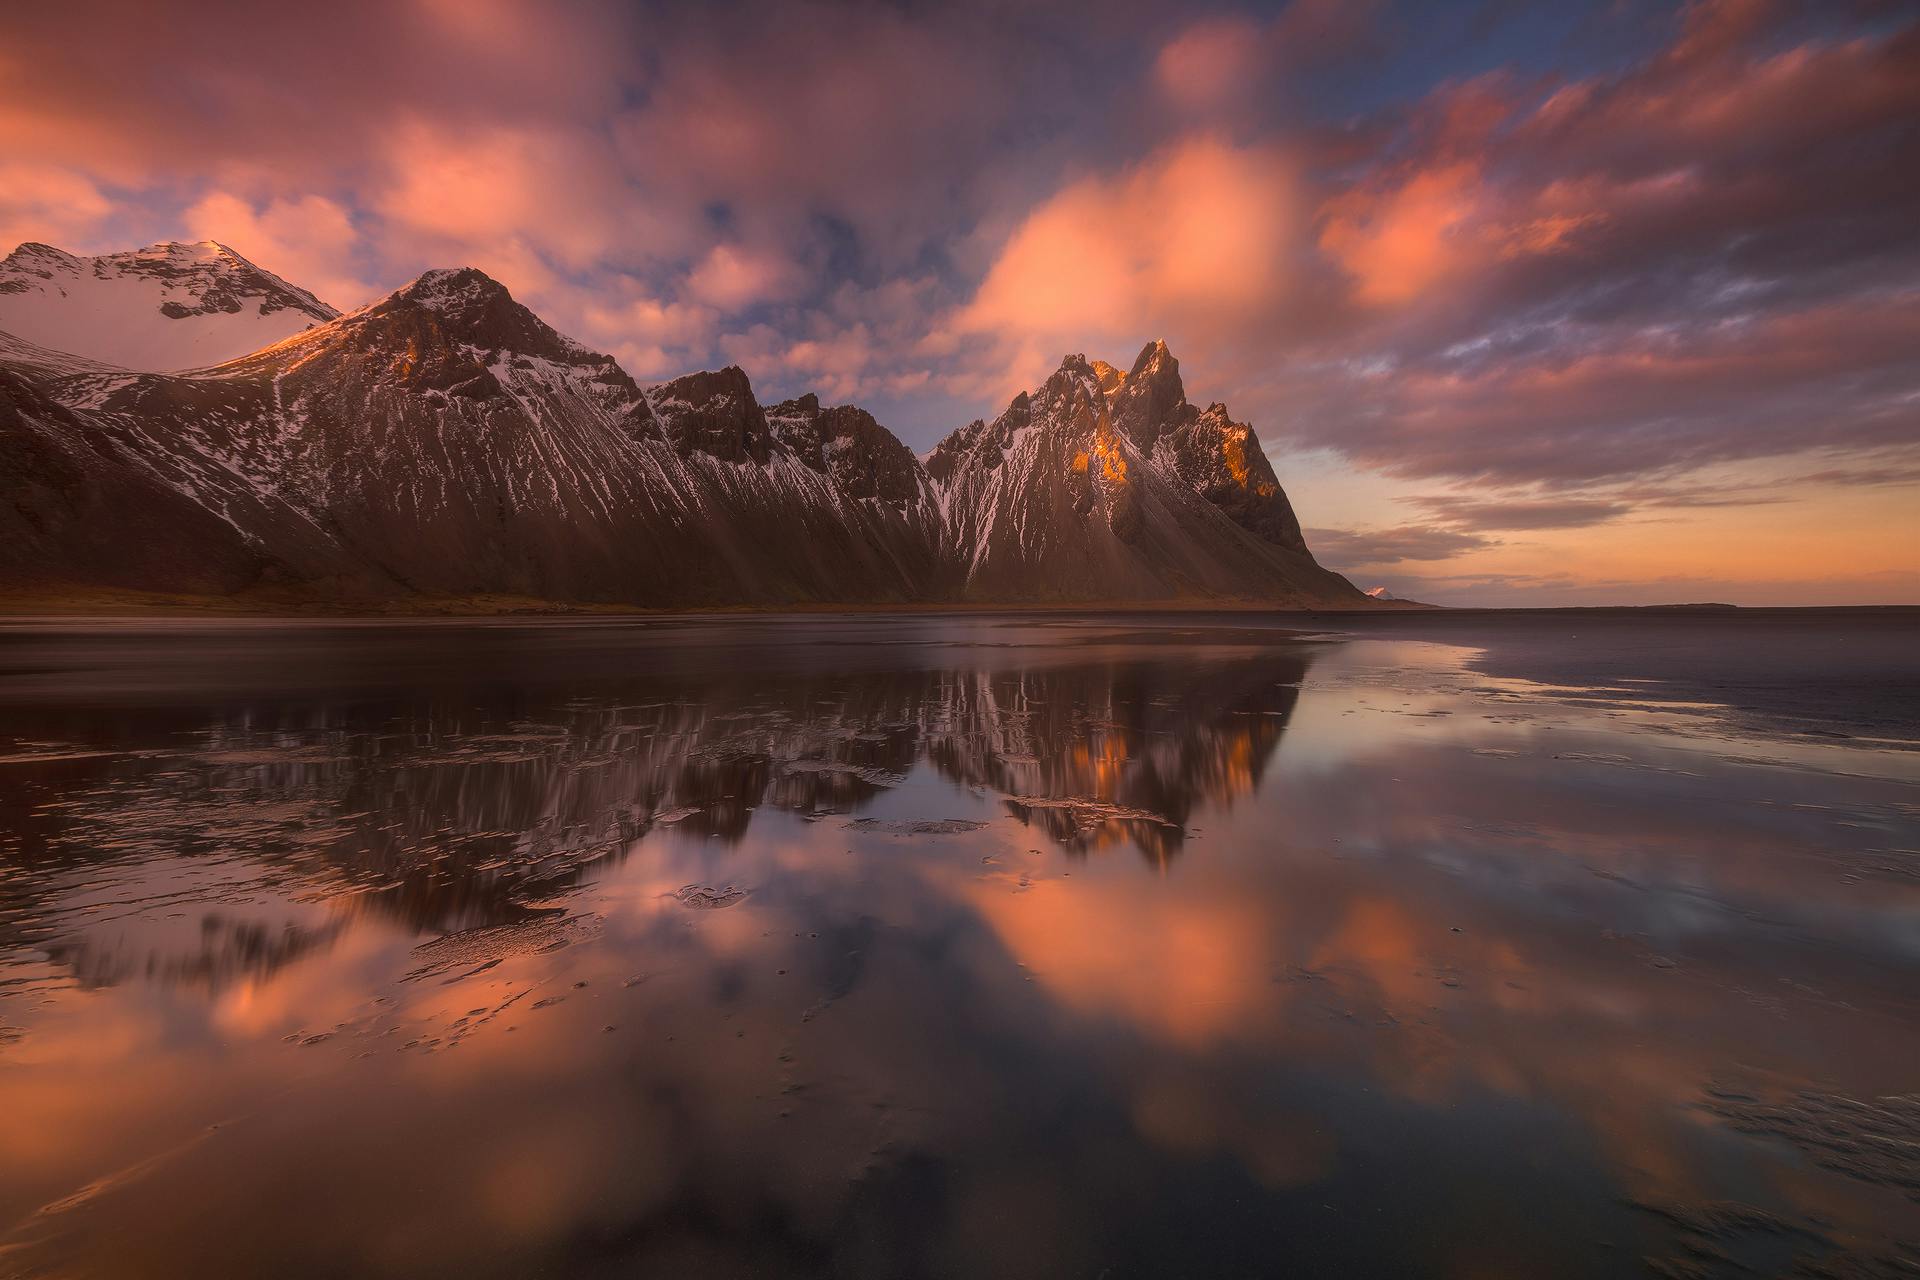 Vestrahorn, undoubtedly one of the most dramatic mountains in Iceland.